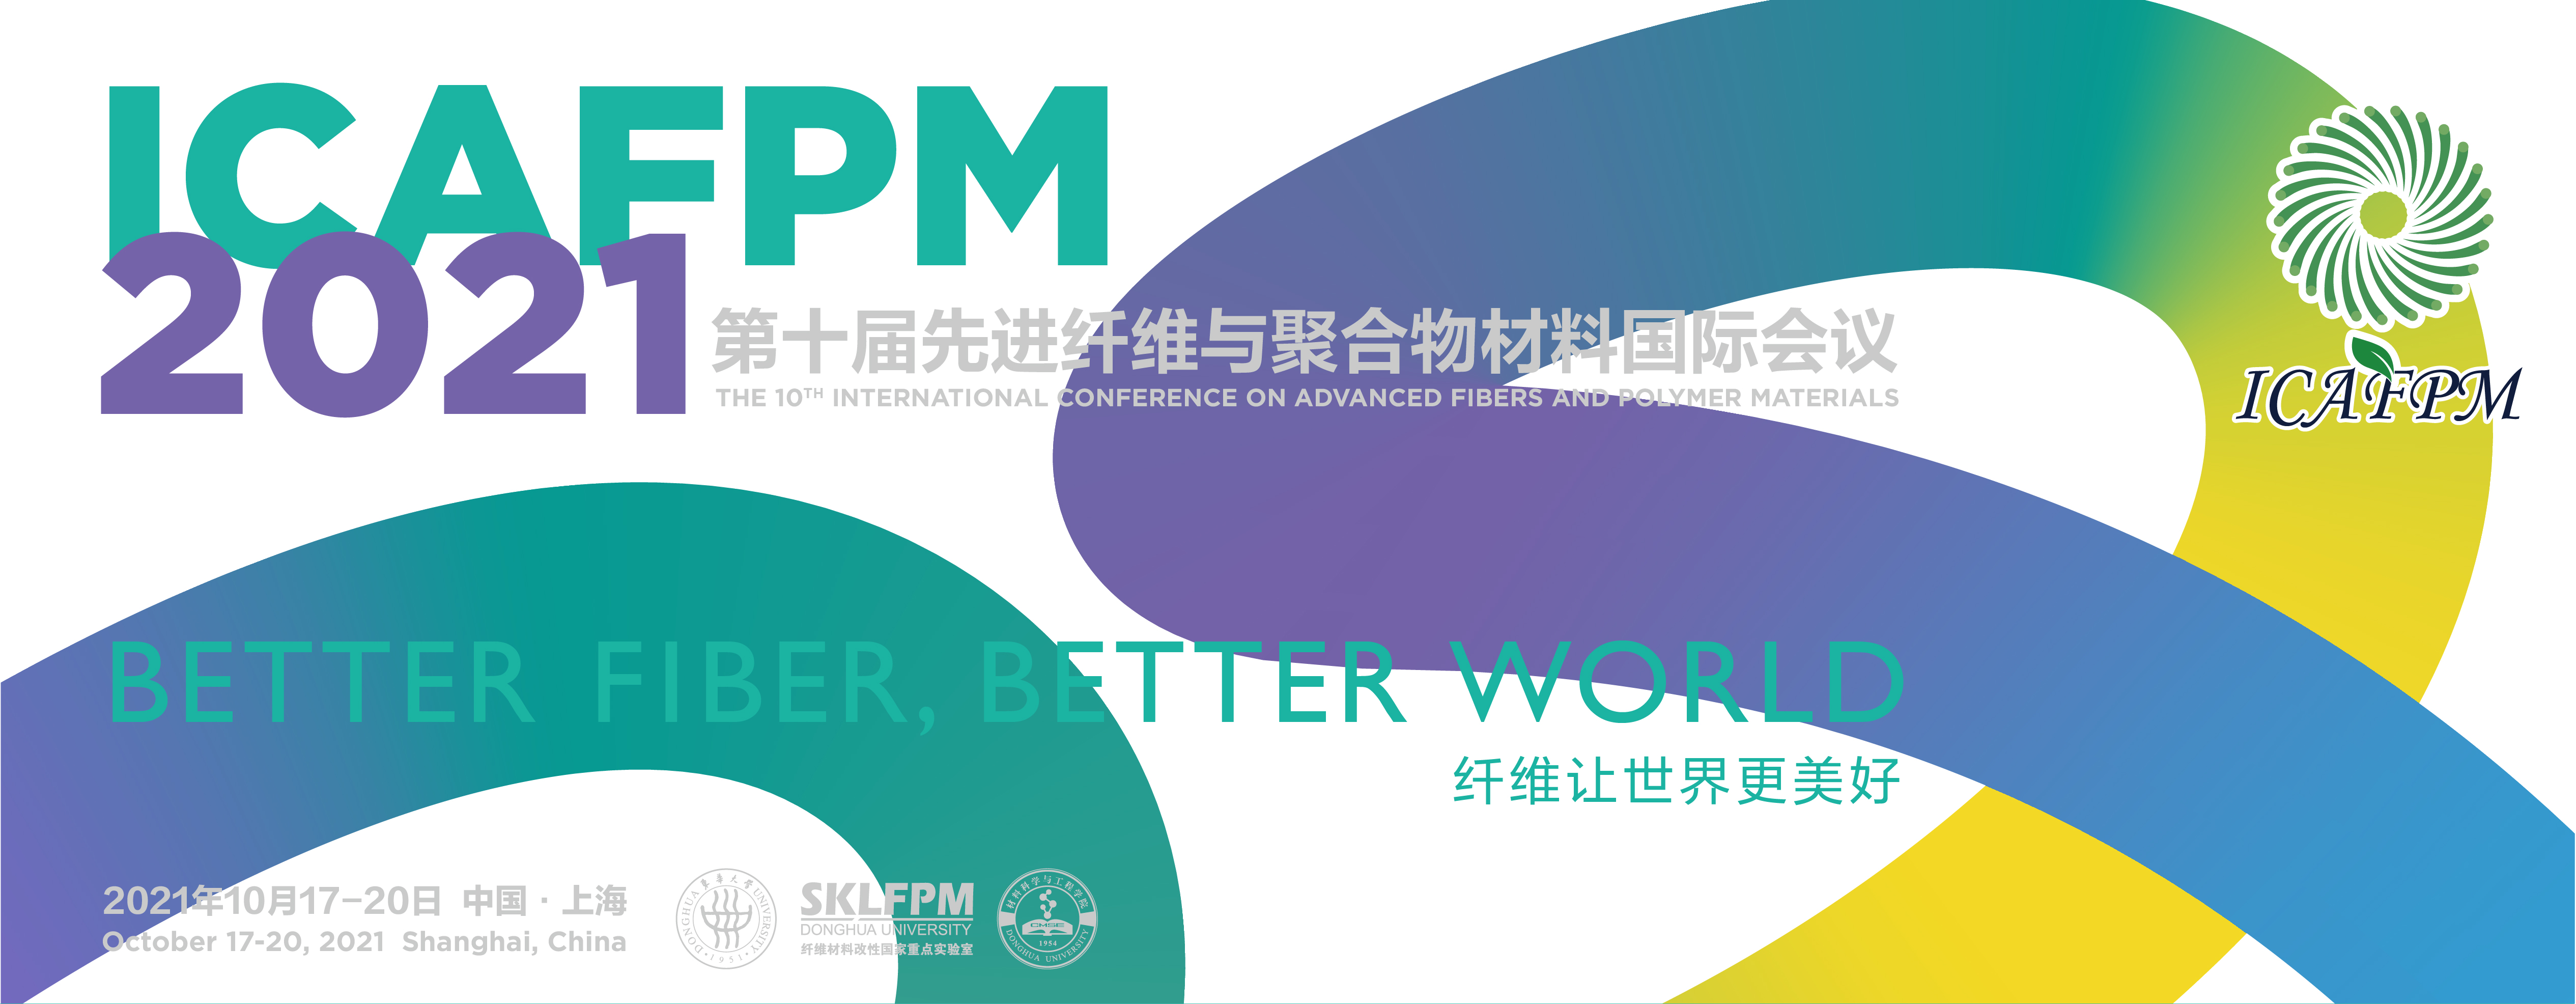 2021 International Conference on Advanced Fibers and Polymer Materials